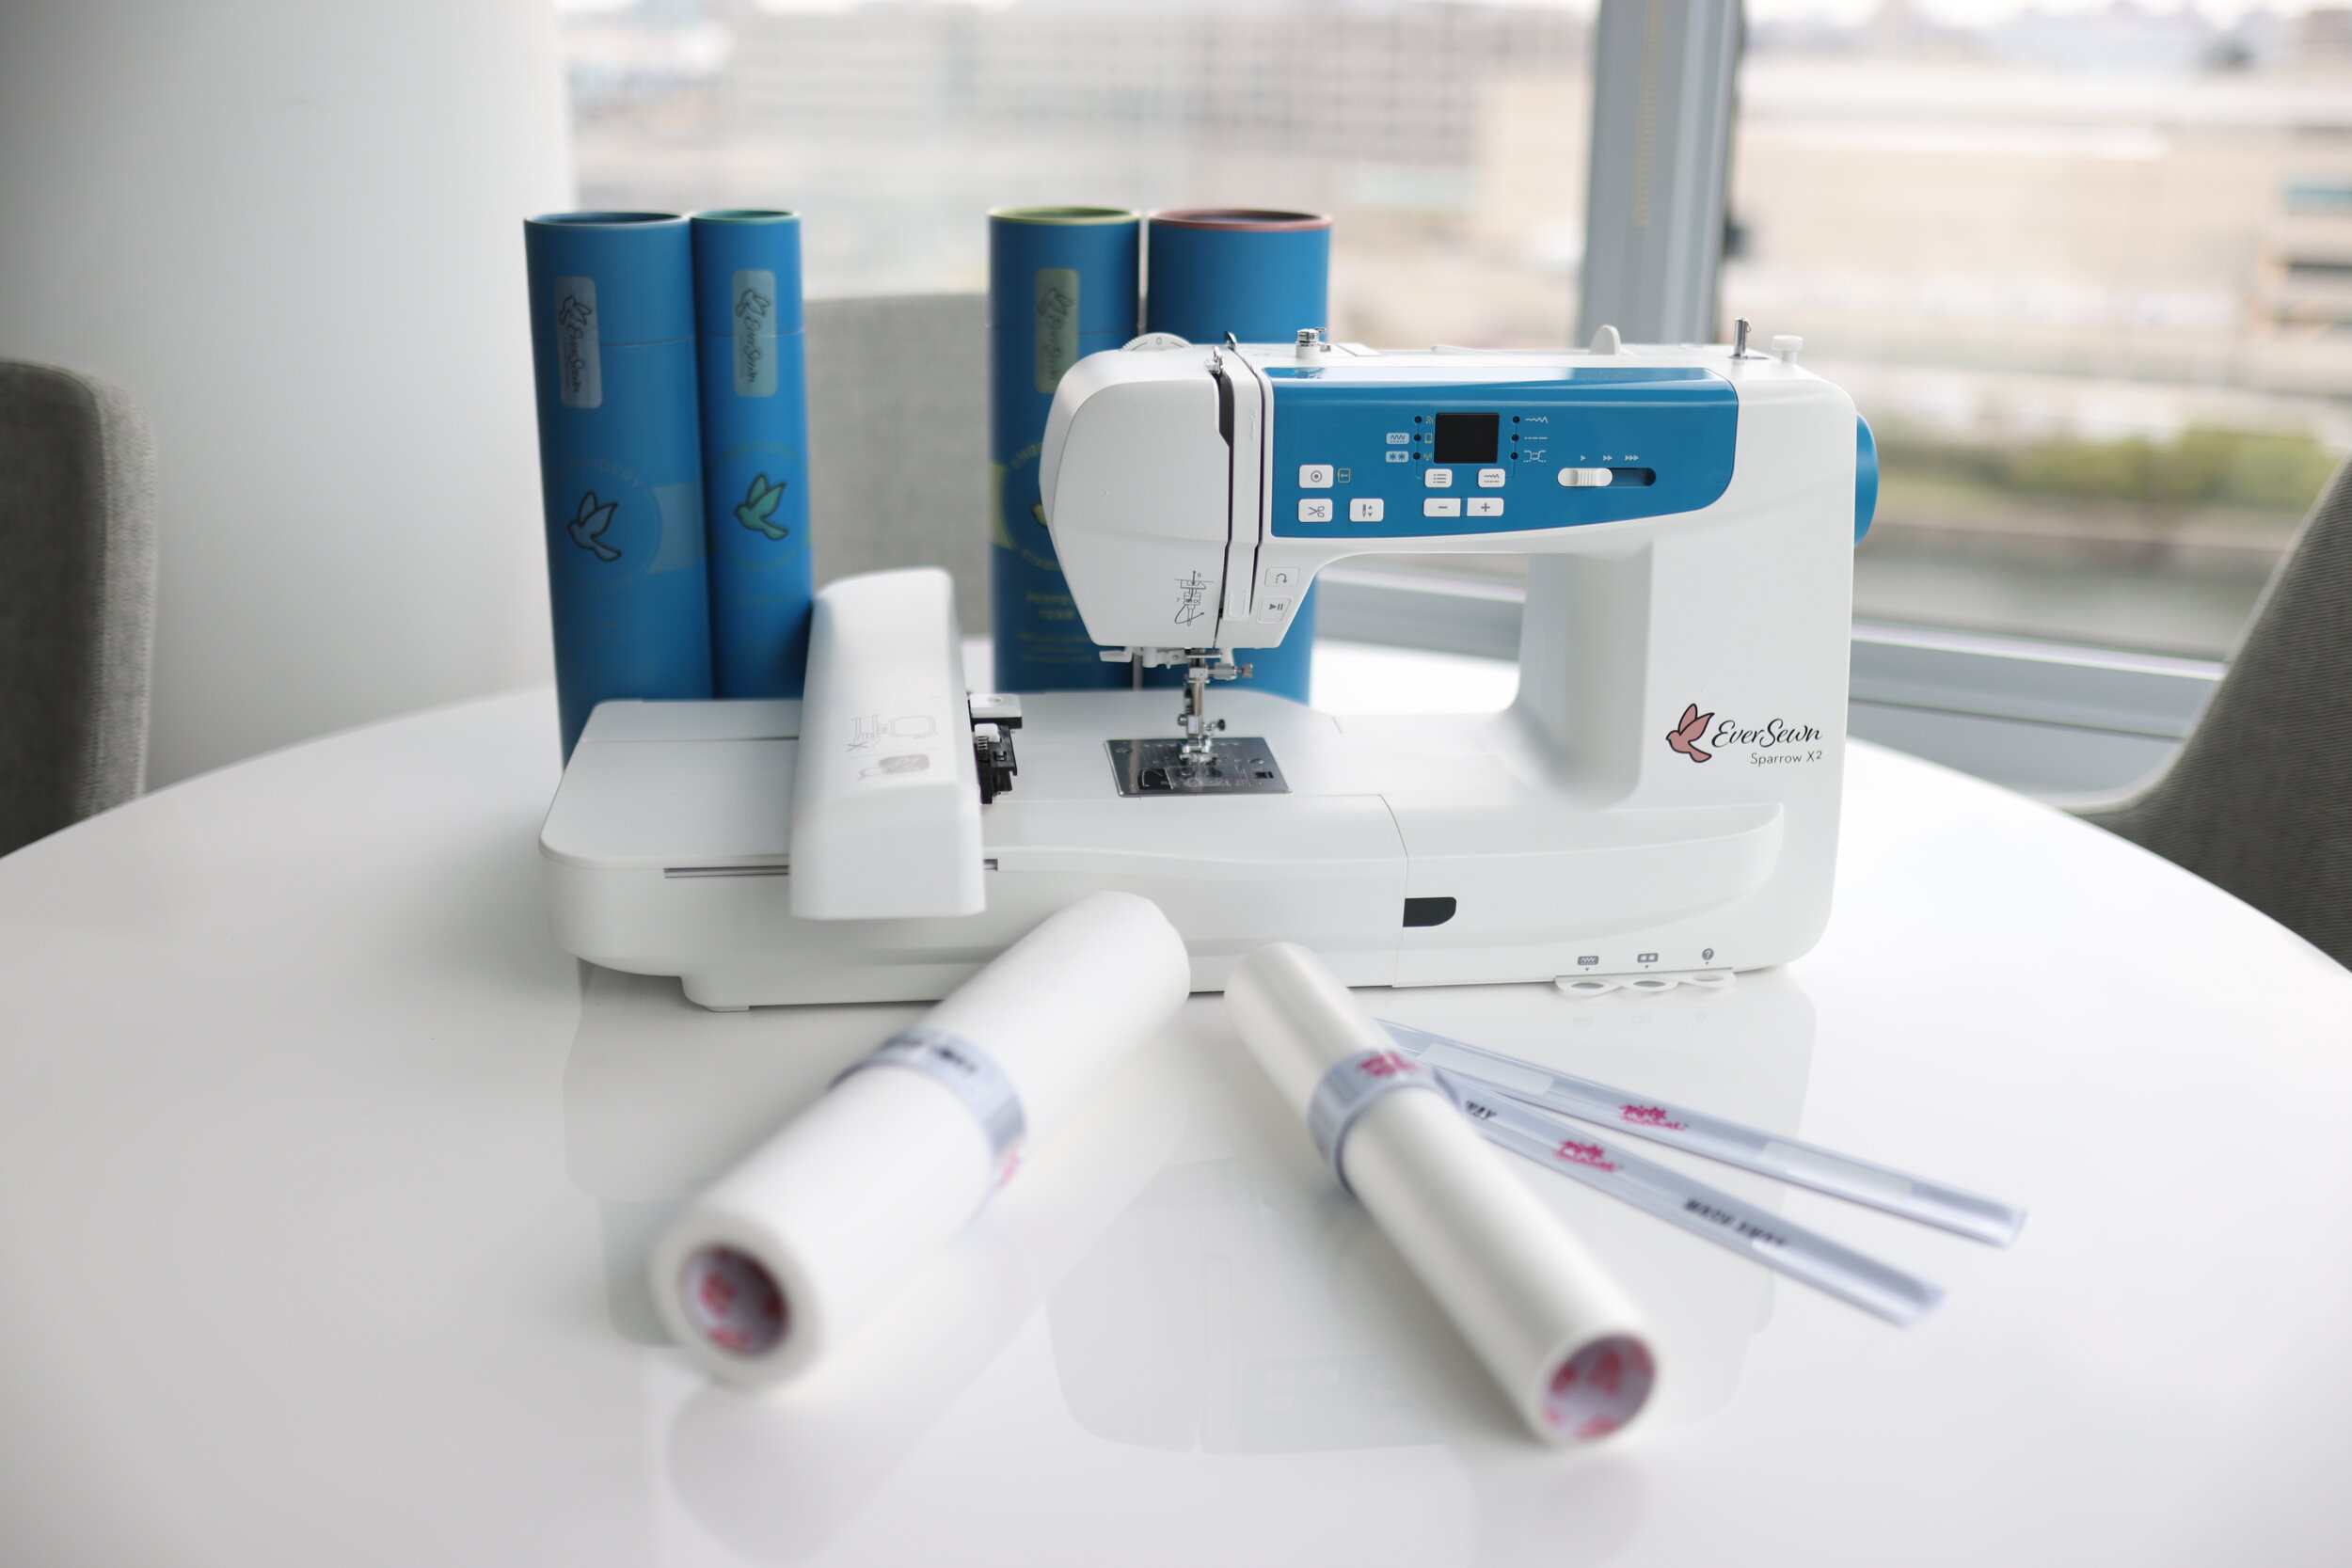 Stabilizers for Machine Embroidery: Tips for Proper Use